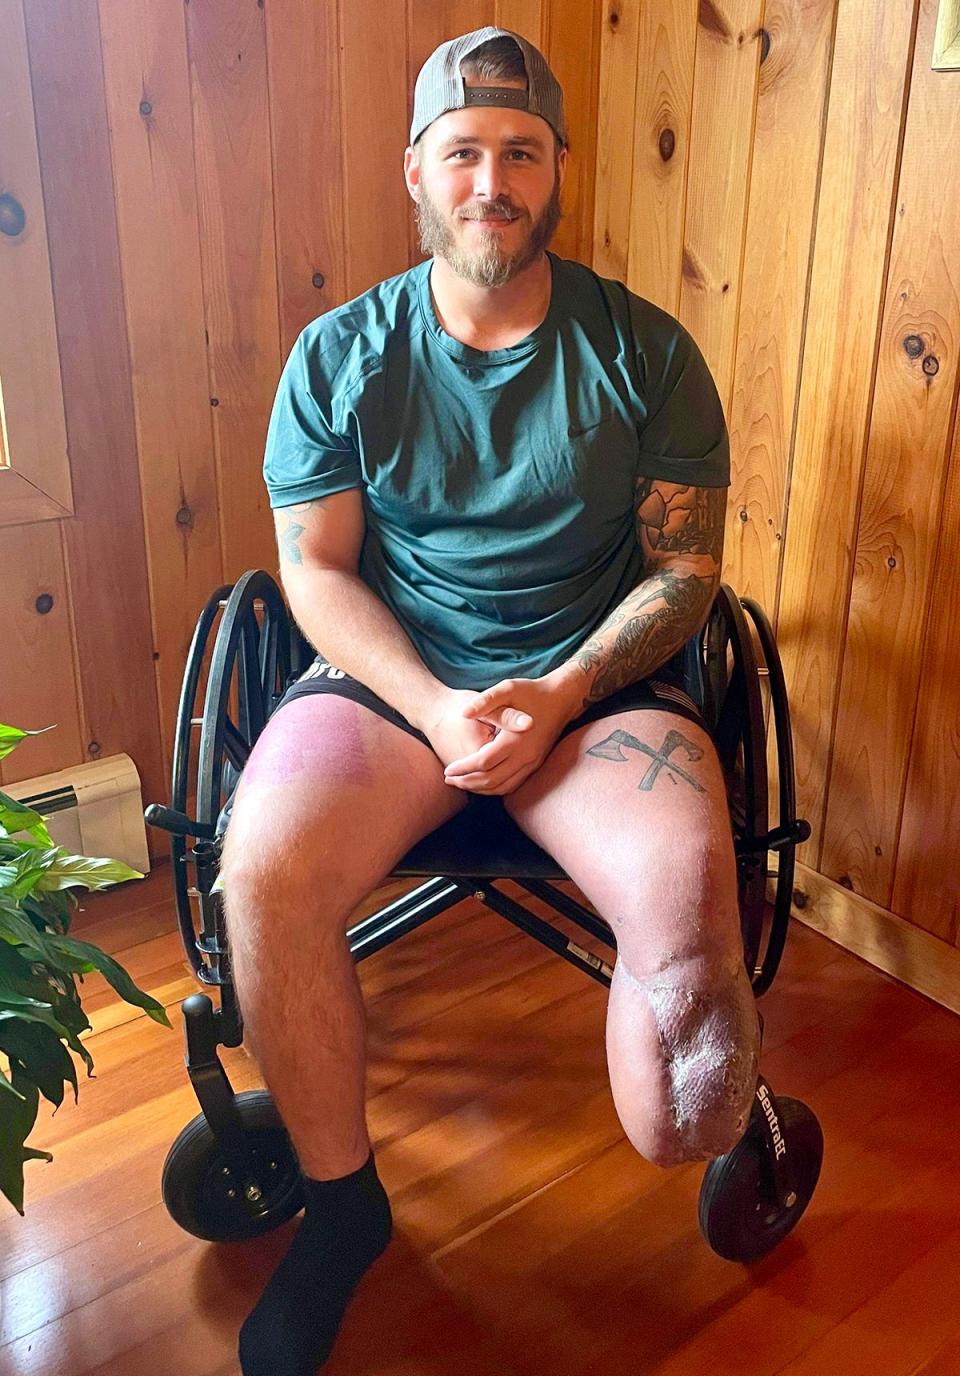 Honesdale High School grad and National Guardsman Logan Freiermuth is making a remarkable recovery from a terrible workplace accident that nearly cost him his life.